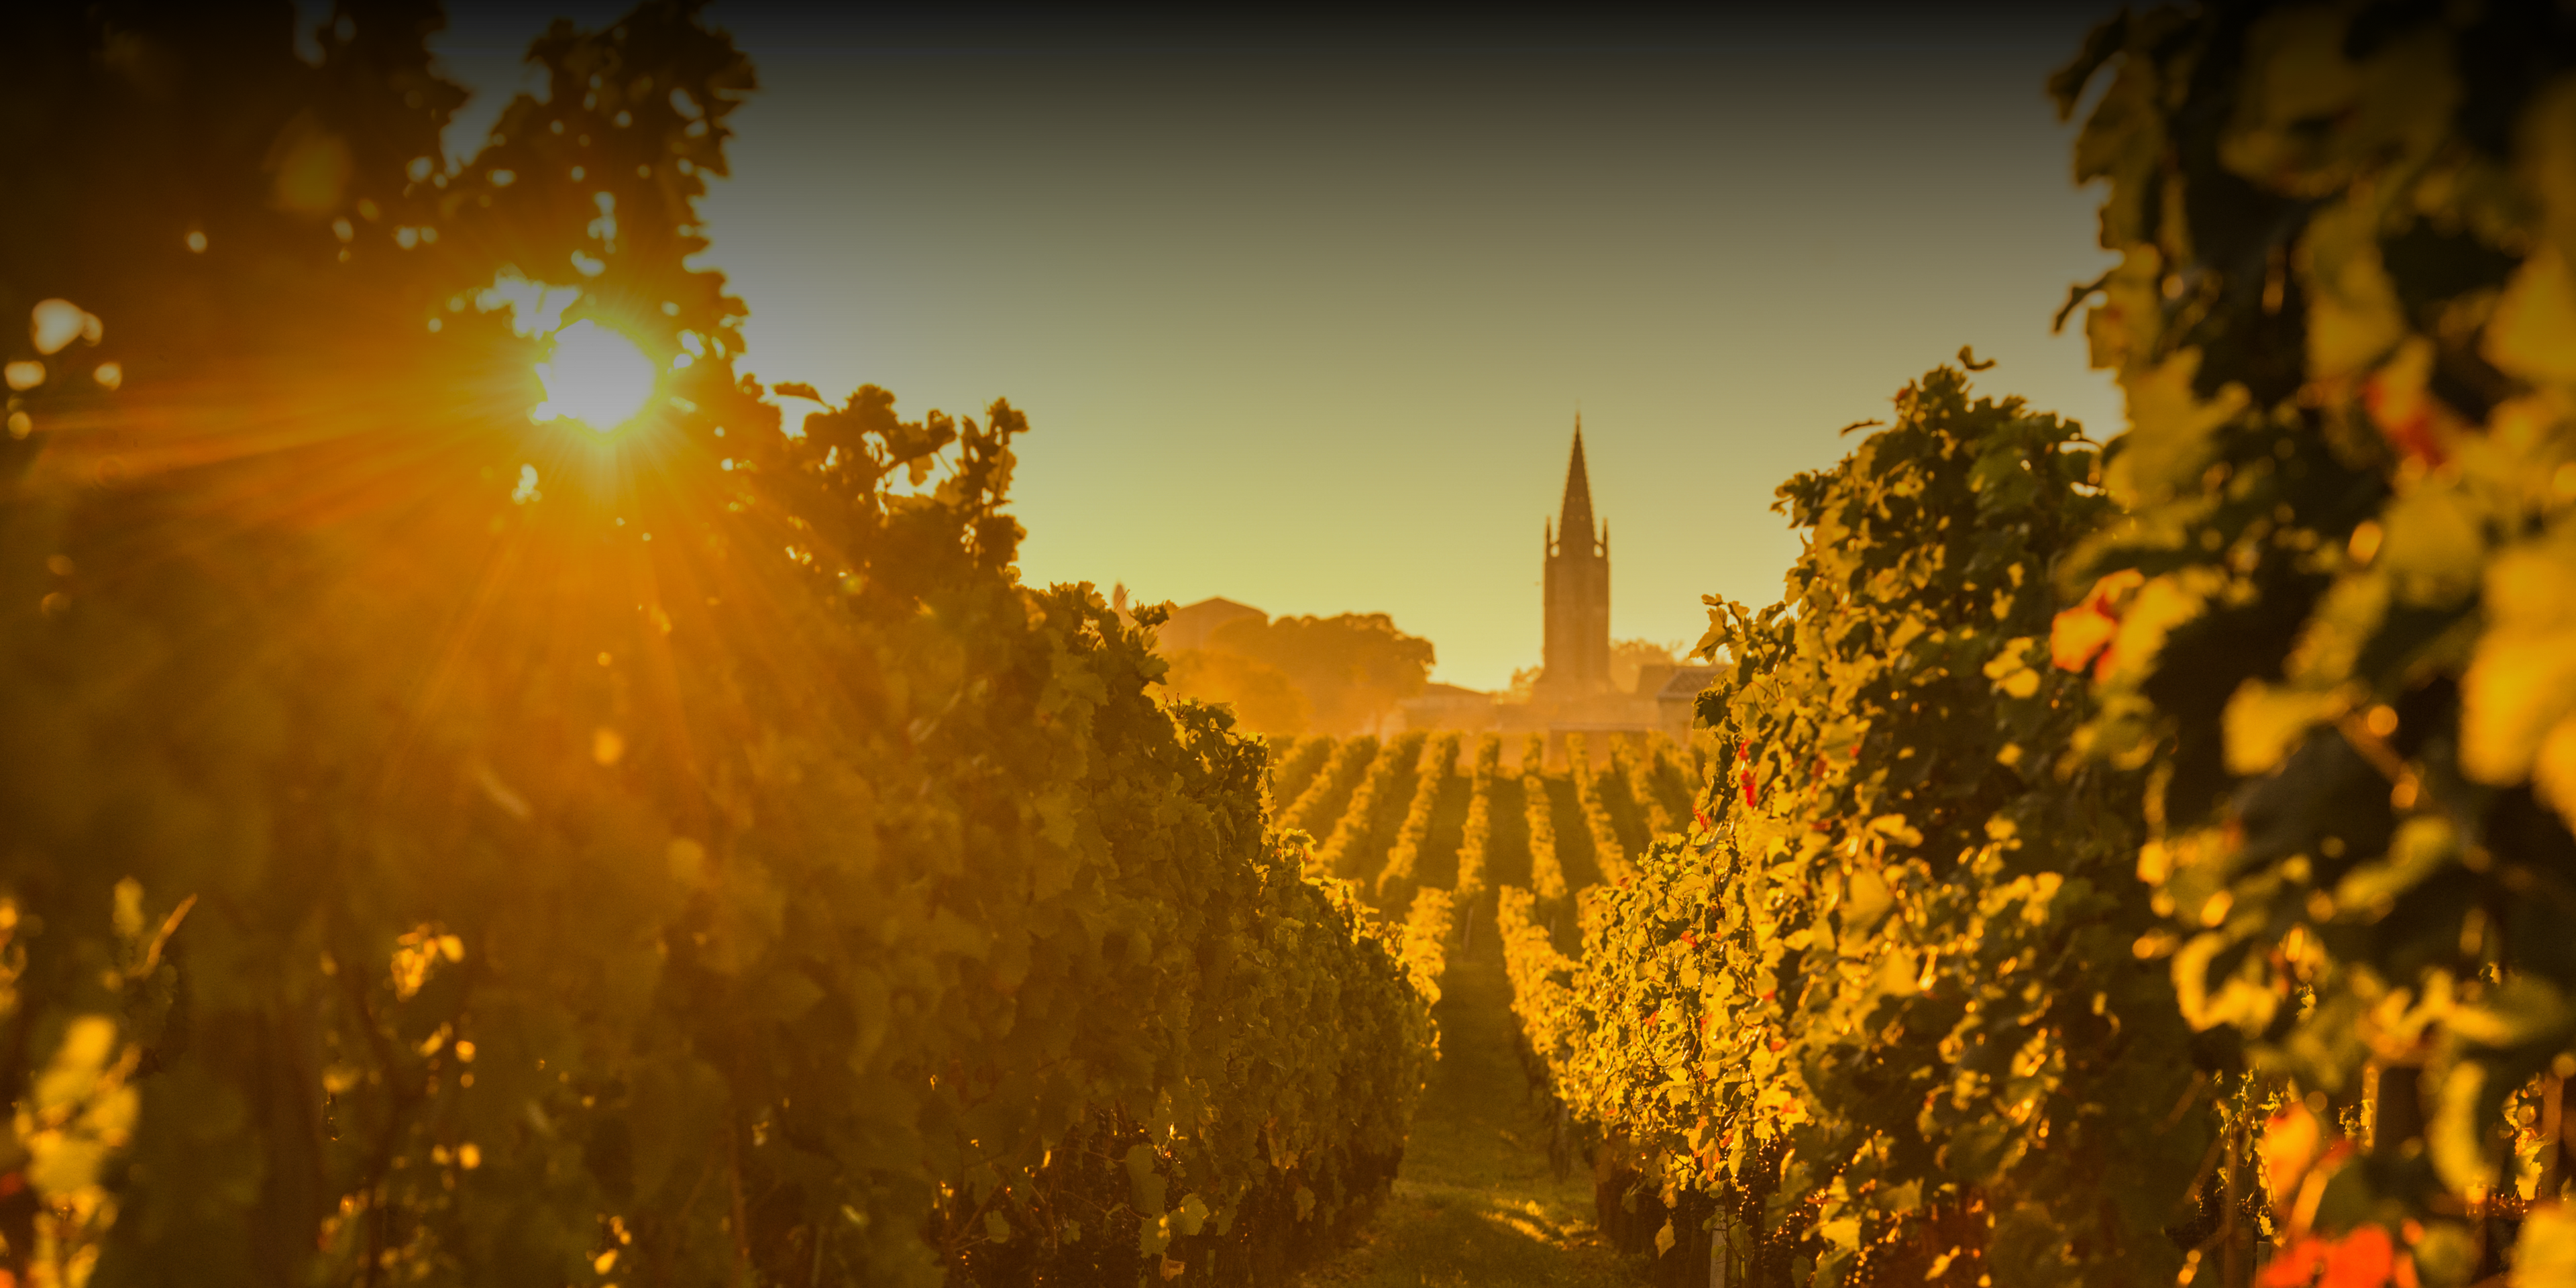 Image of Wine Farm with the sun rising